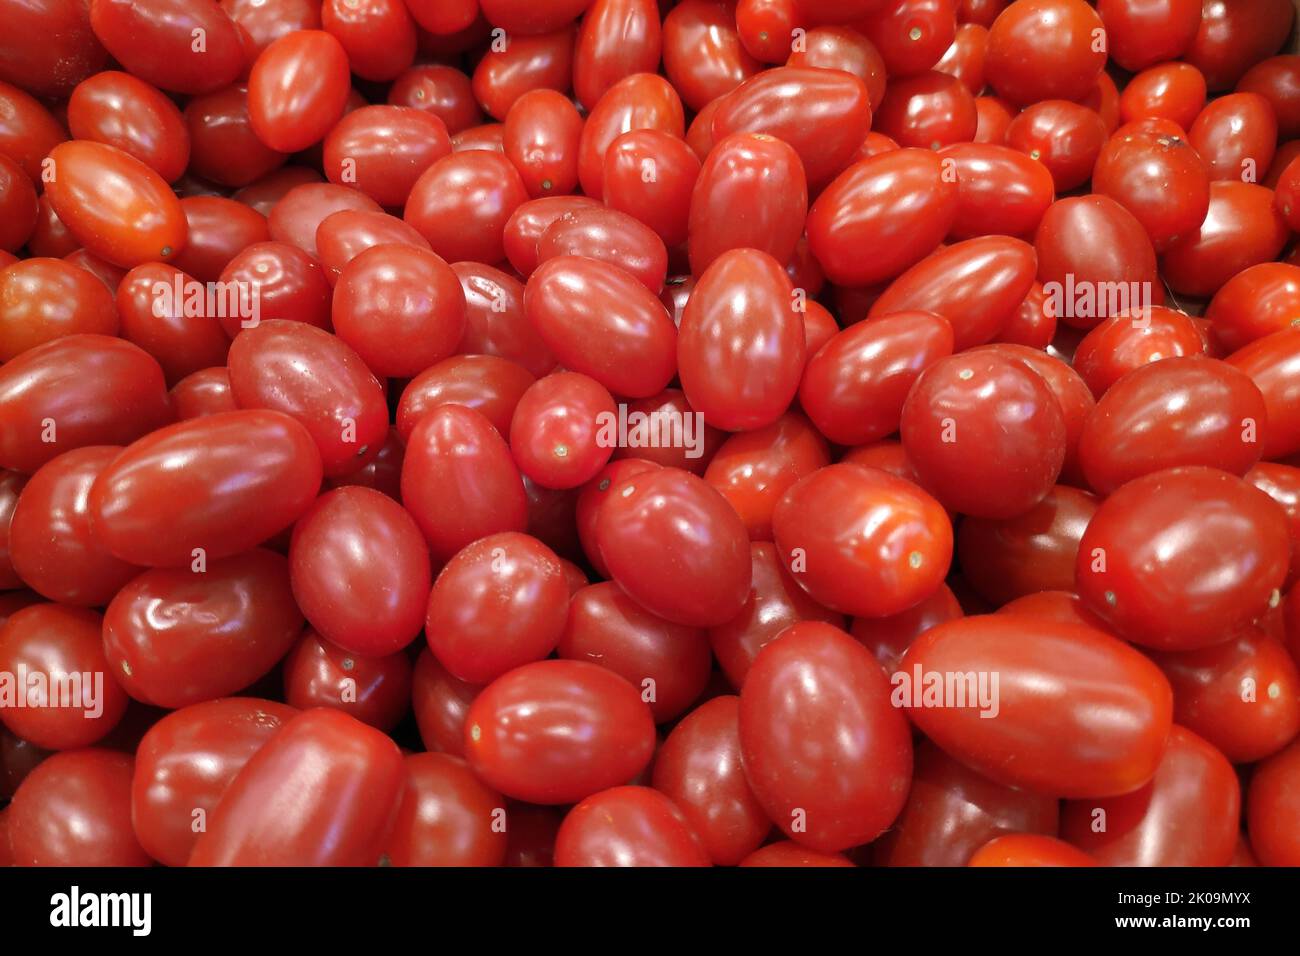 Close-up on a stack of red plum tomatoes a market stall. Stock Photo